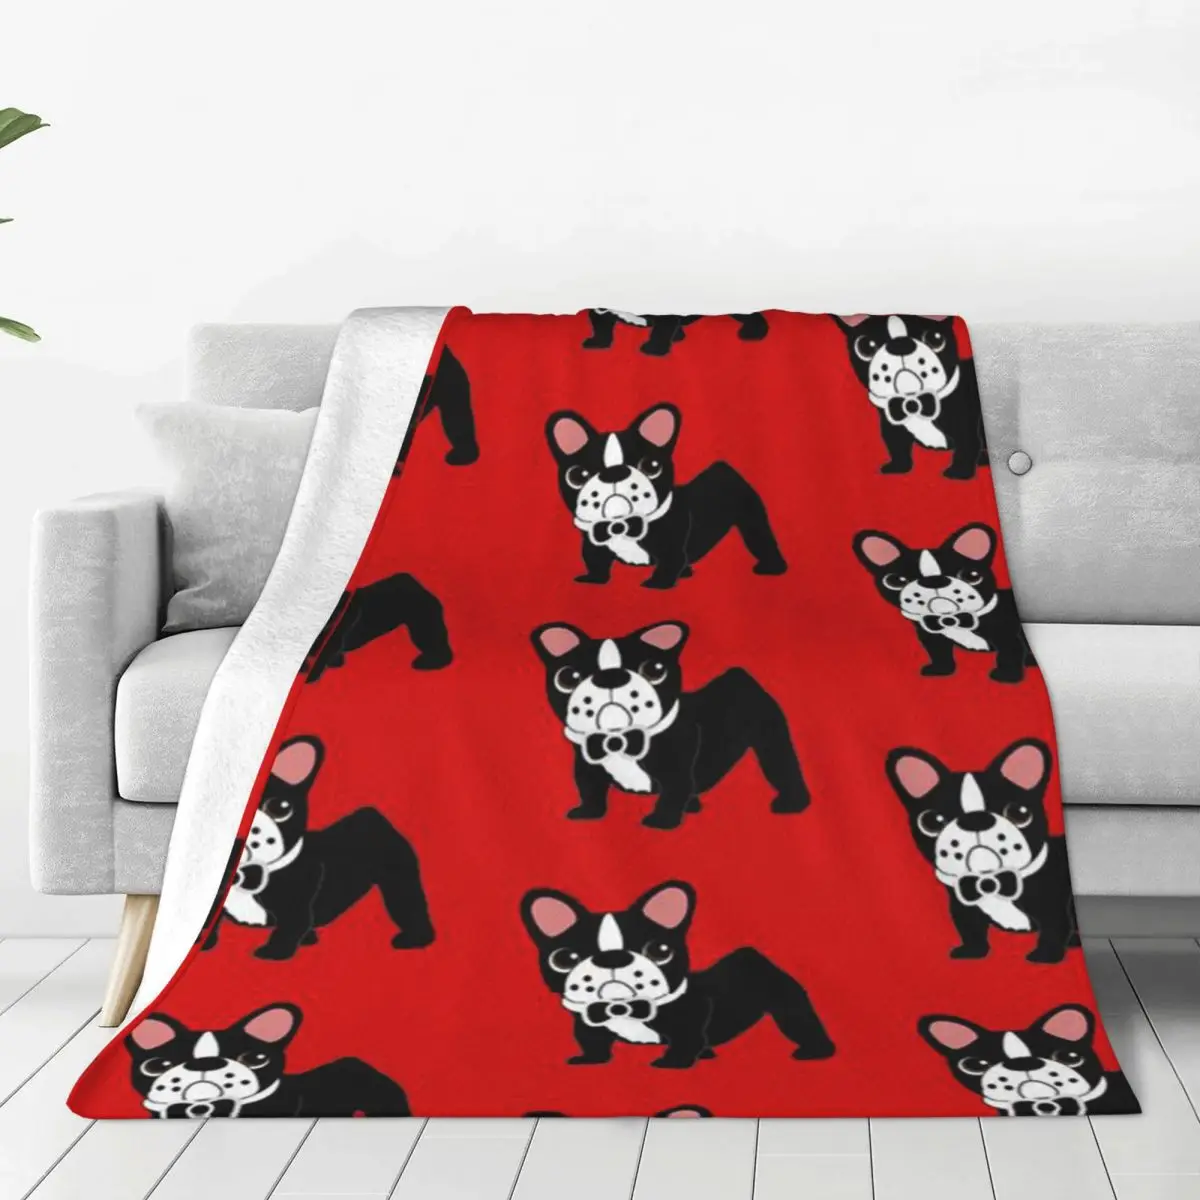 

Boston Terrier Dog Soft Flannel Throw Blanket for Couch Bed Warm Blanket Lightweight Blankets for Sofa Travel Blanket